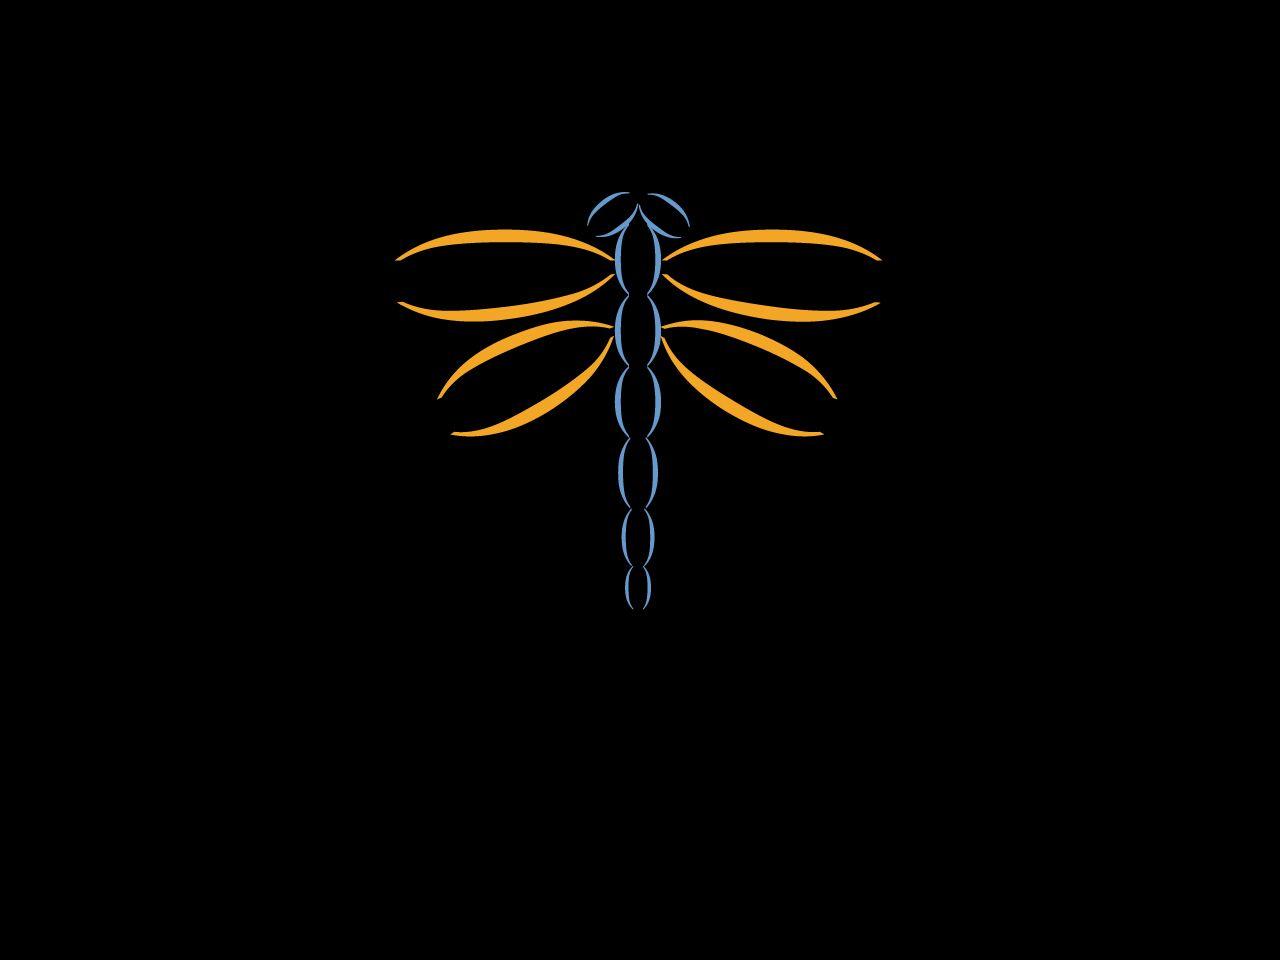 Black Dragonfly Wallpaper 41493 High Resolution. download all